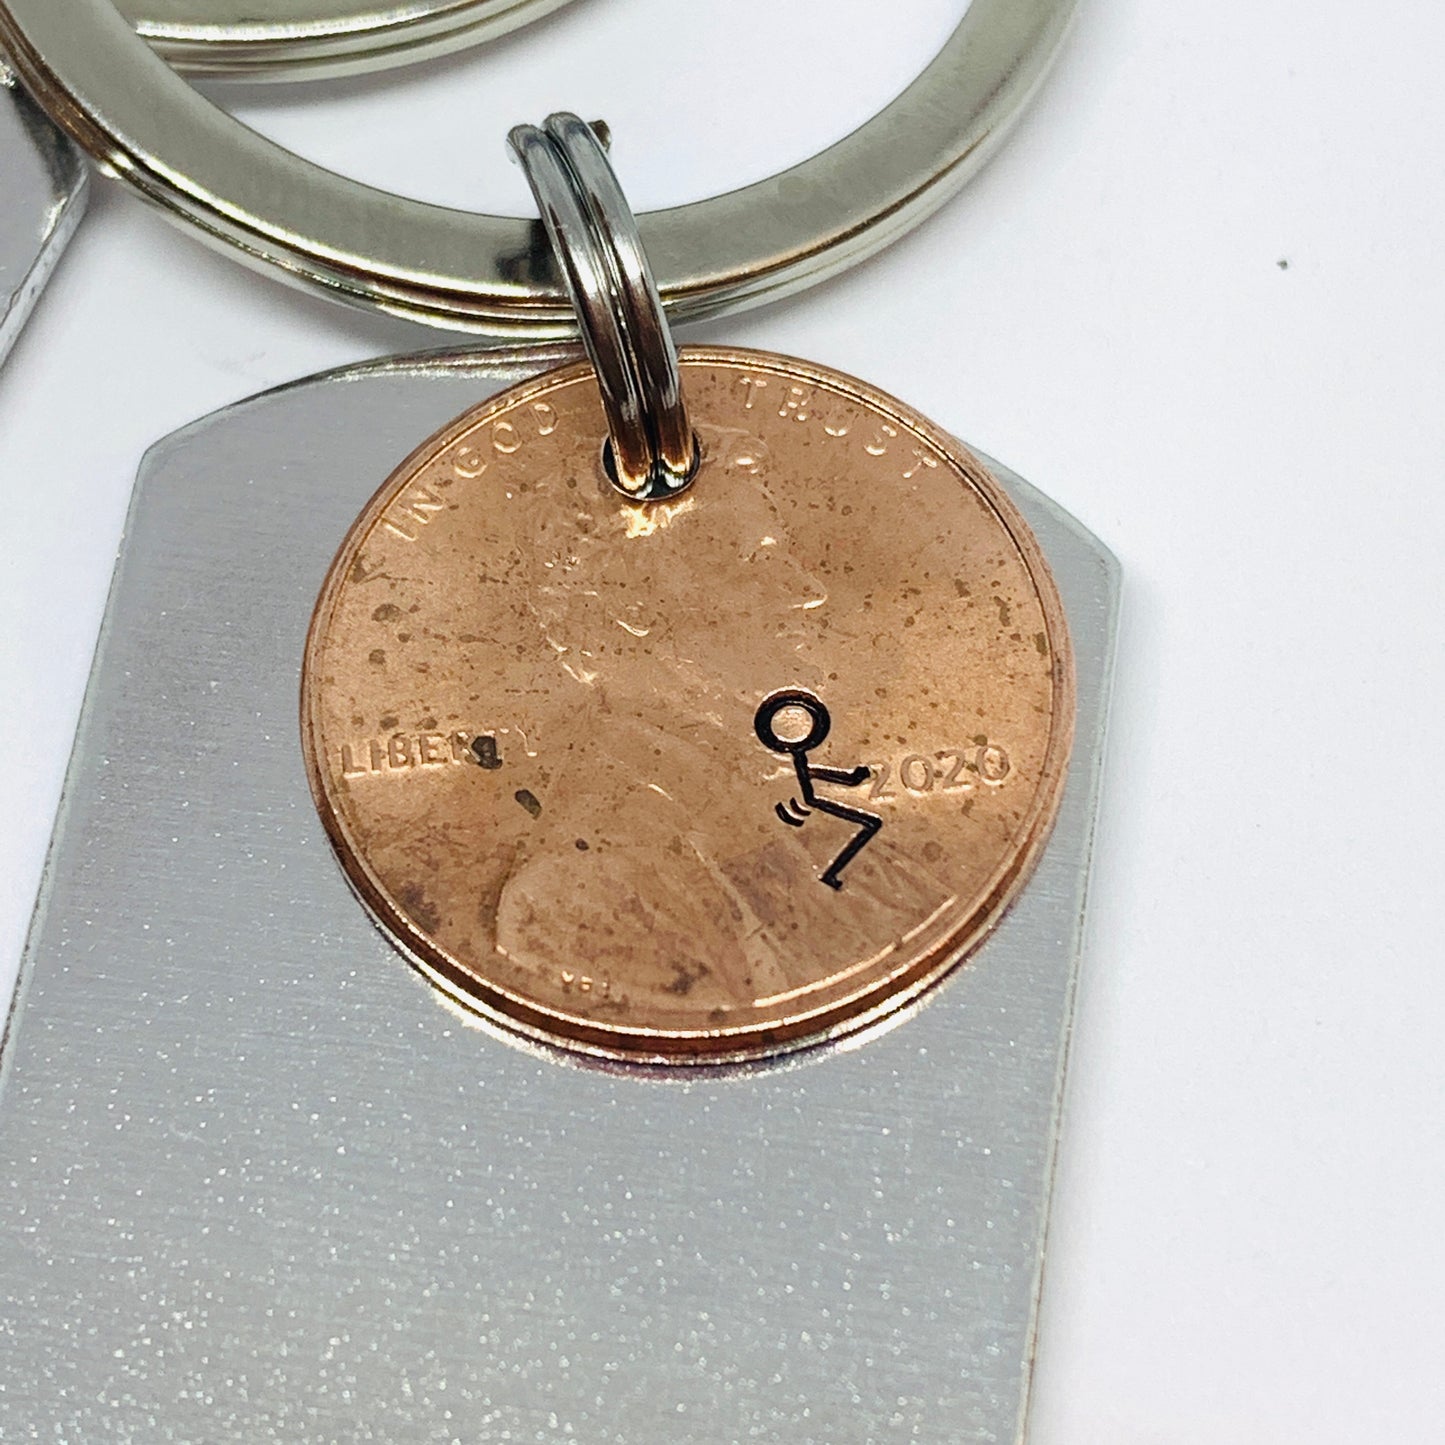 F*ck 2020 with Penny - Hand Stamped Metal Key Ring | Dog Tag 2020 Penny | Humping 2020 Key Chain | Adult Mature